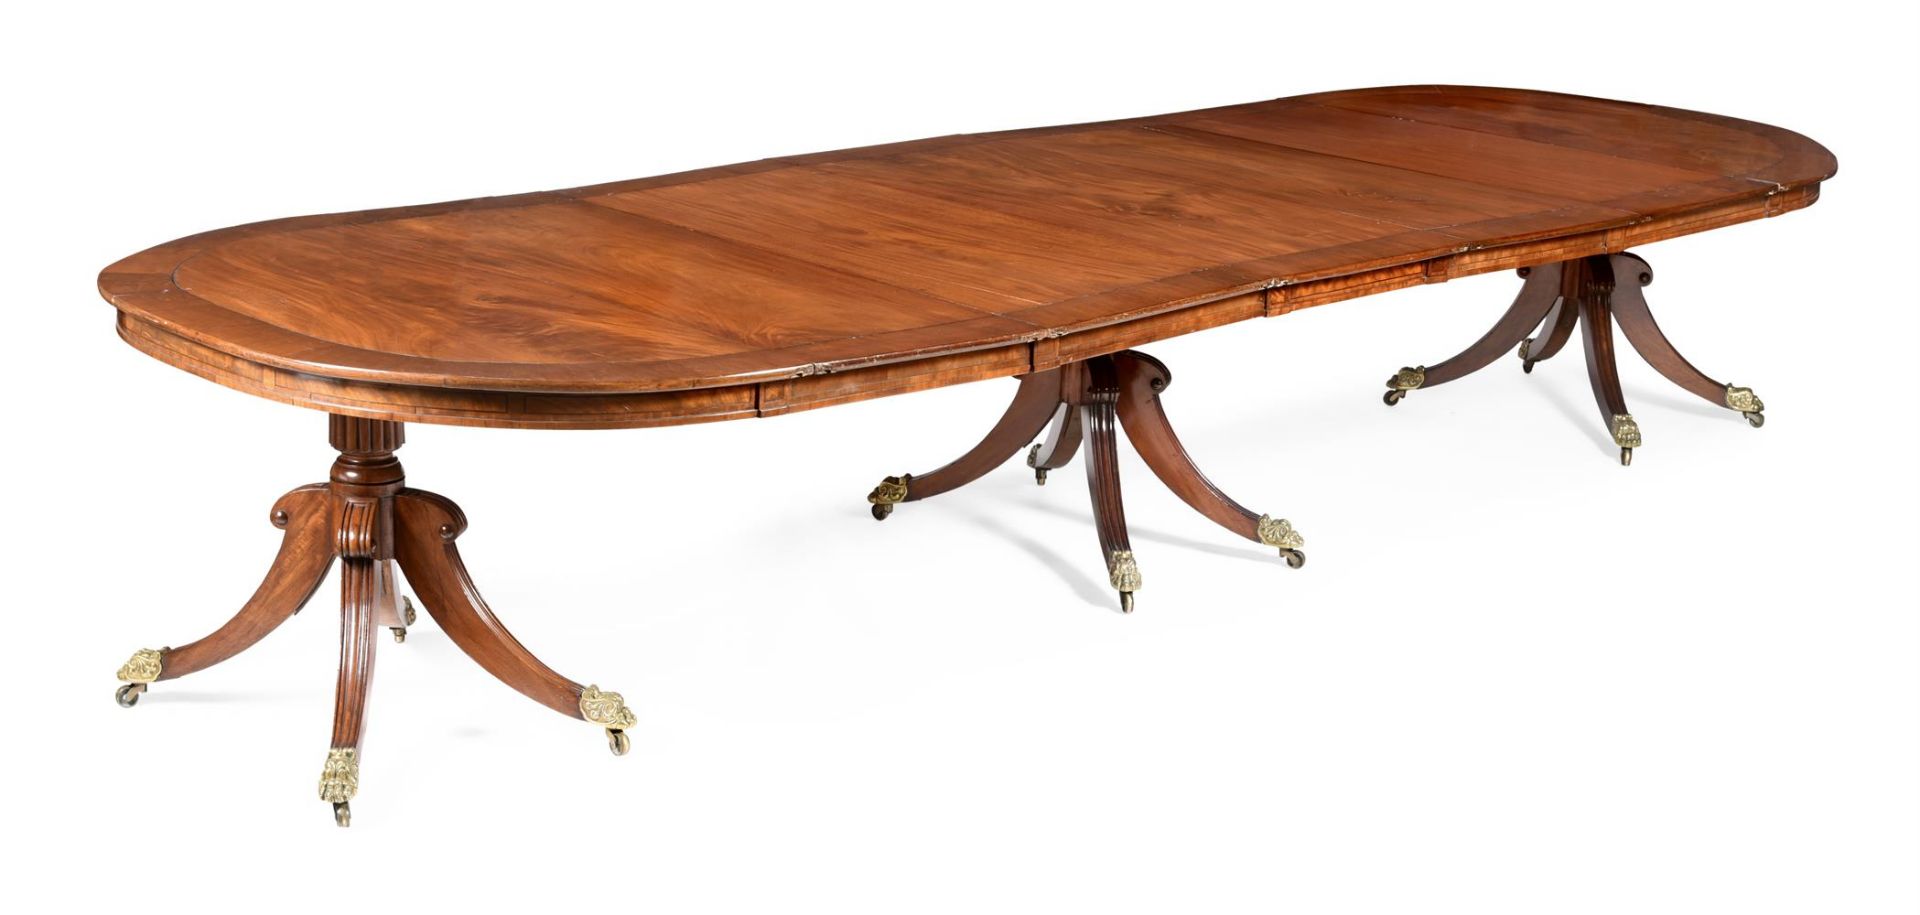 Y A REGENCY MAHOGANY AND EBONY INLAID TRIPLE PEDESTAL DINING TABLE, DUBLIN, CIRCA 1820 AND LATER